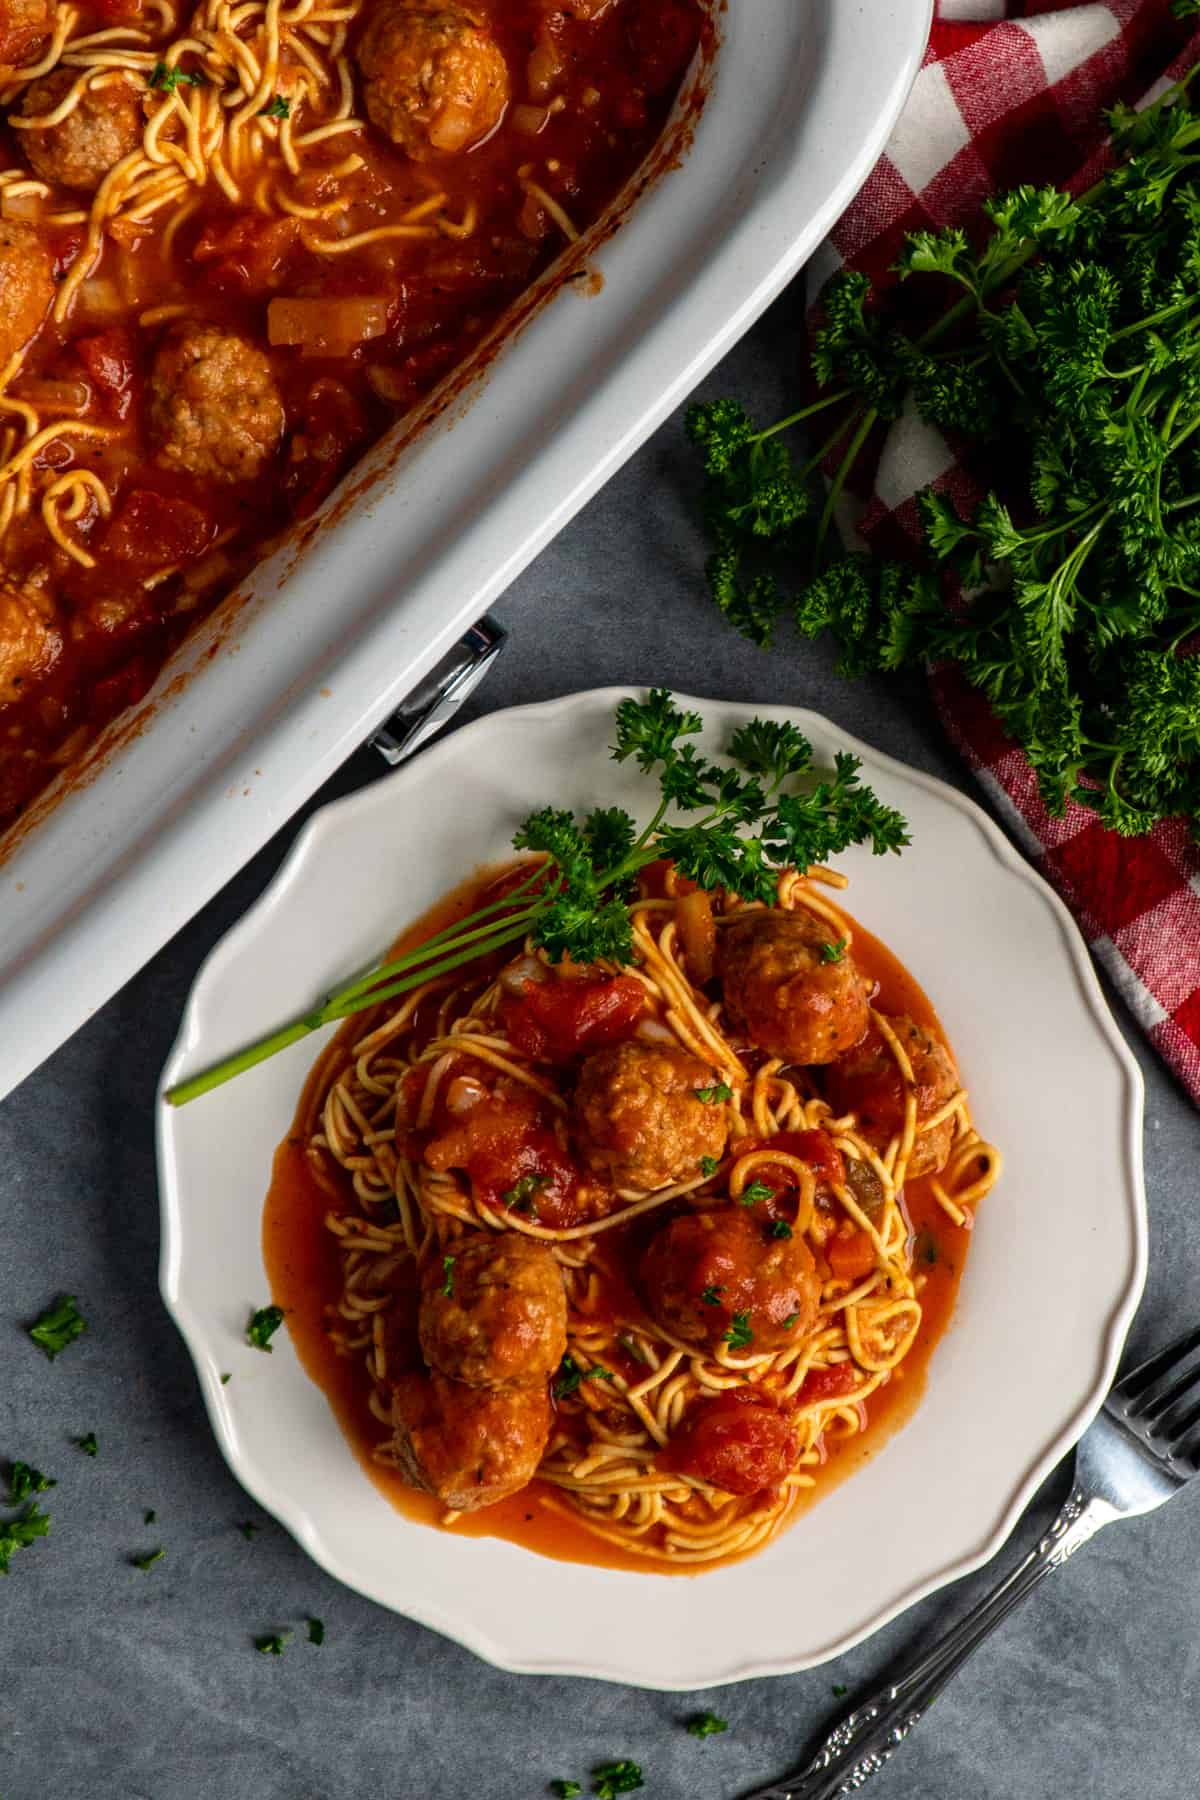 Spaghetti and meatballs on a plate.